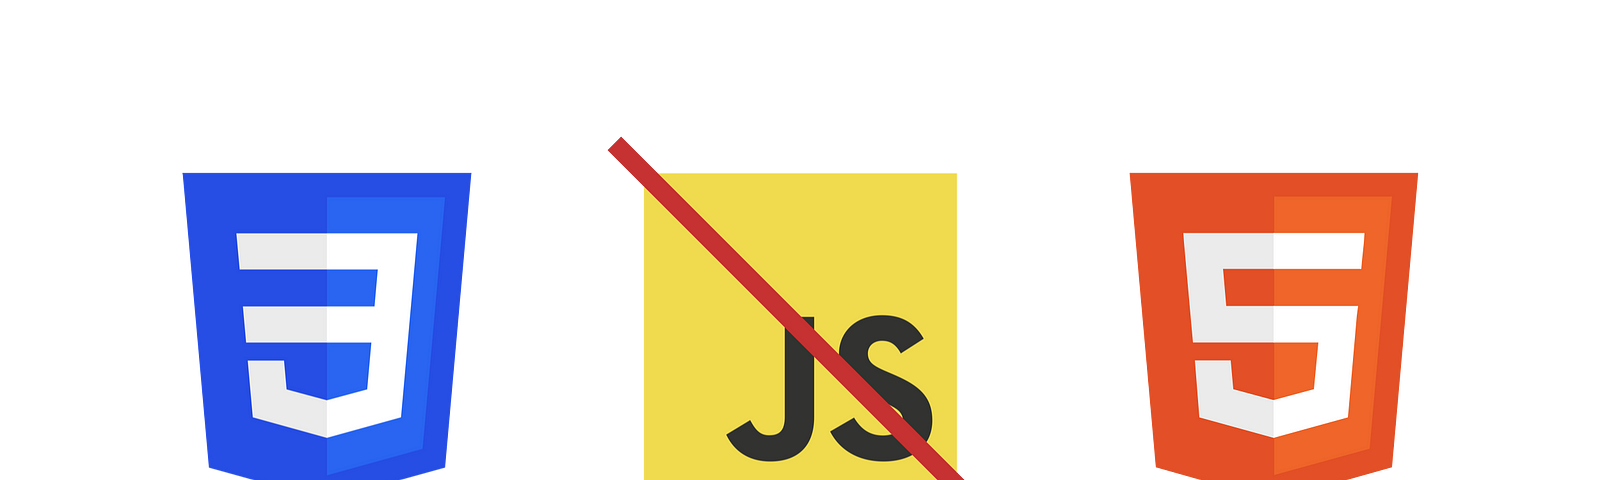 CSS3 logo, JS logo with a red line through it and the HTML5 logo in a row